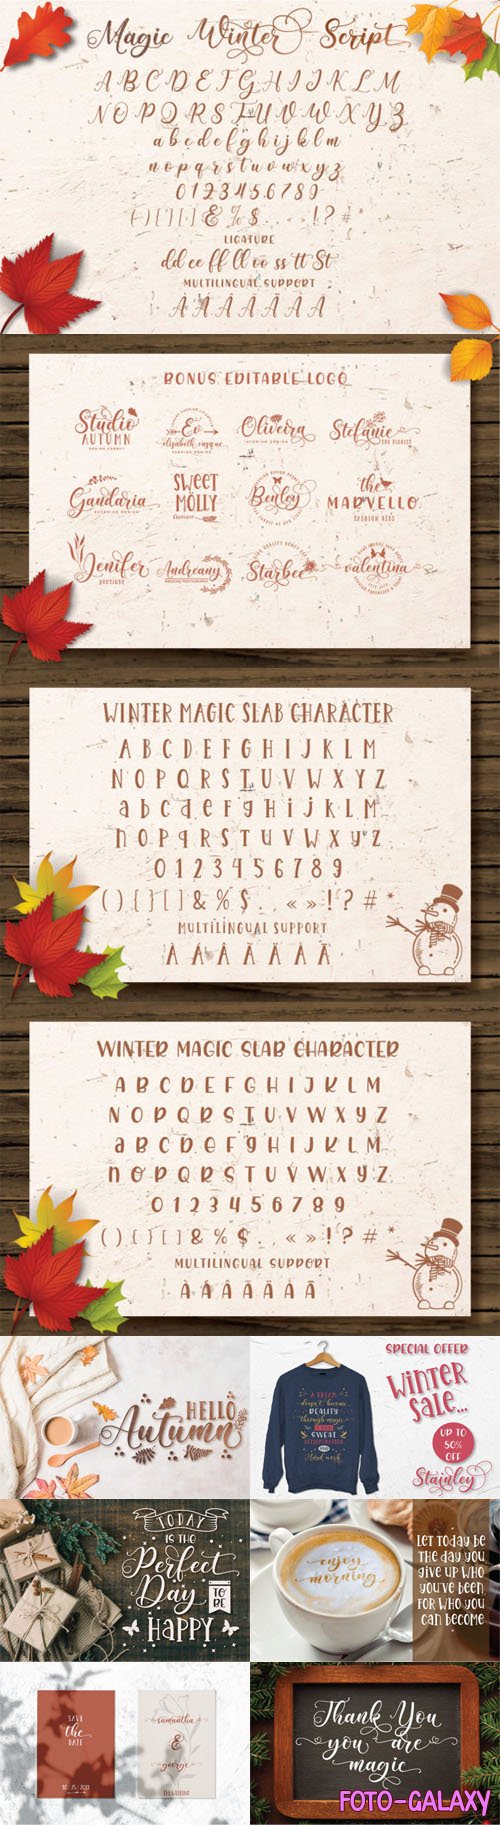 Magic Winter - Lovely Font Trio + Extras